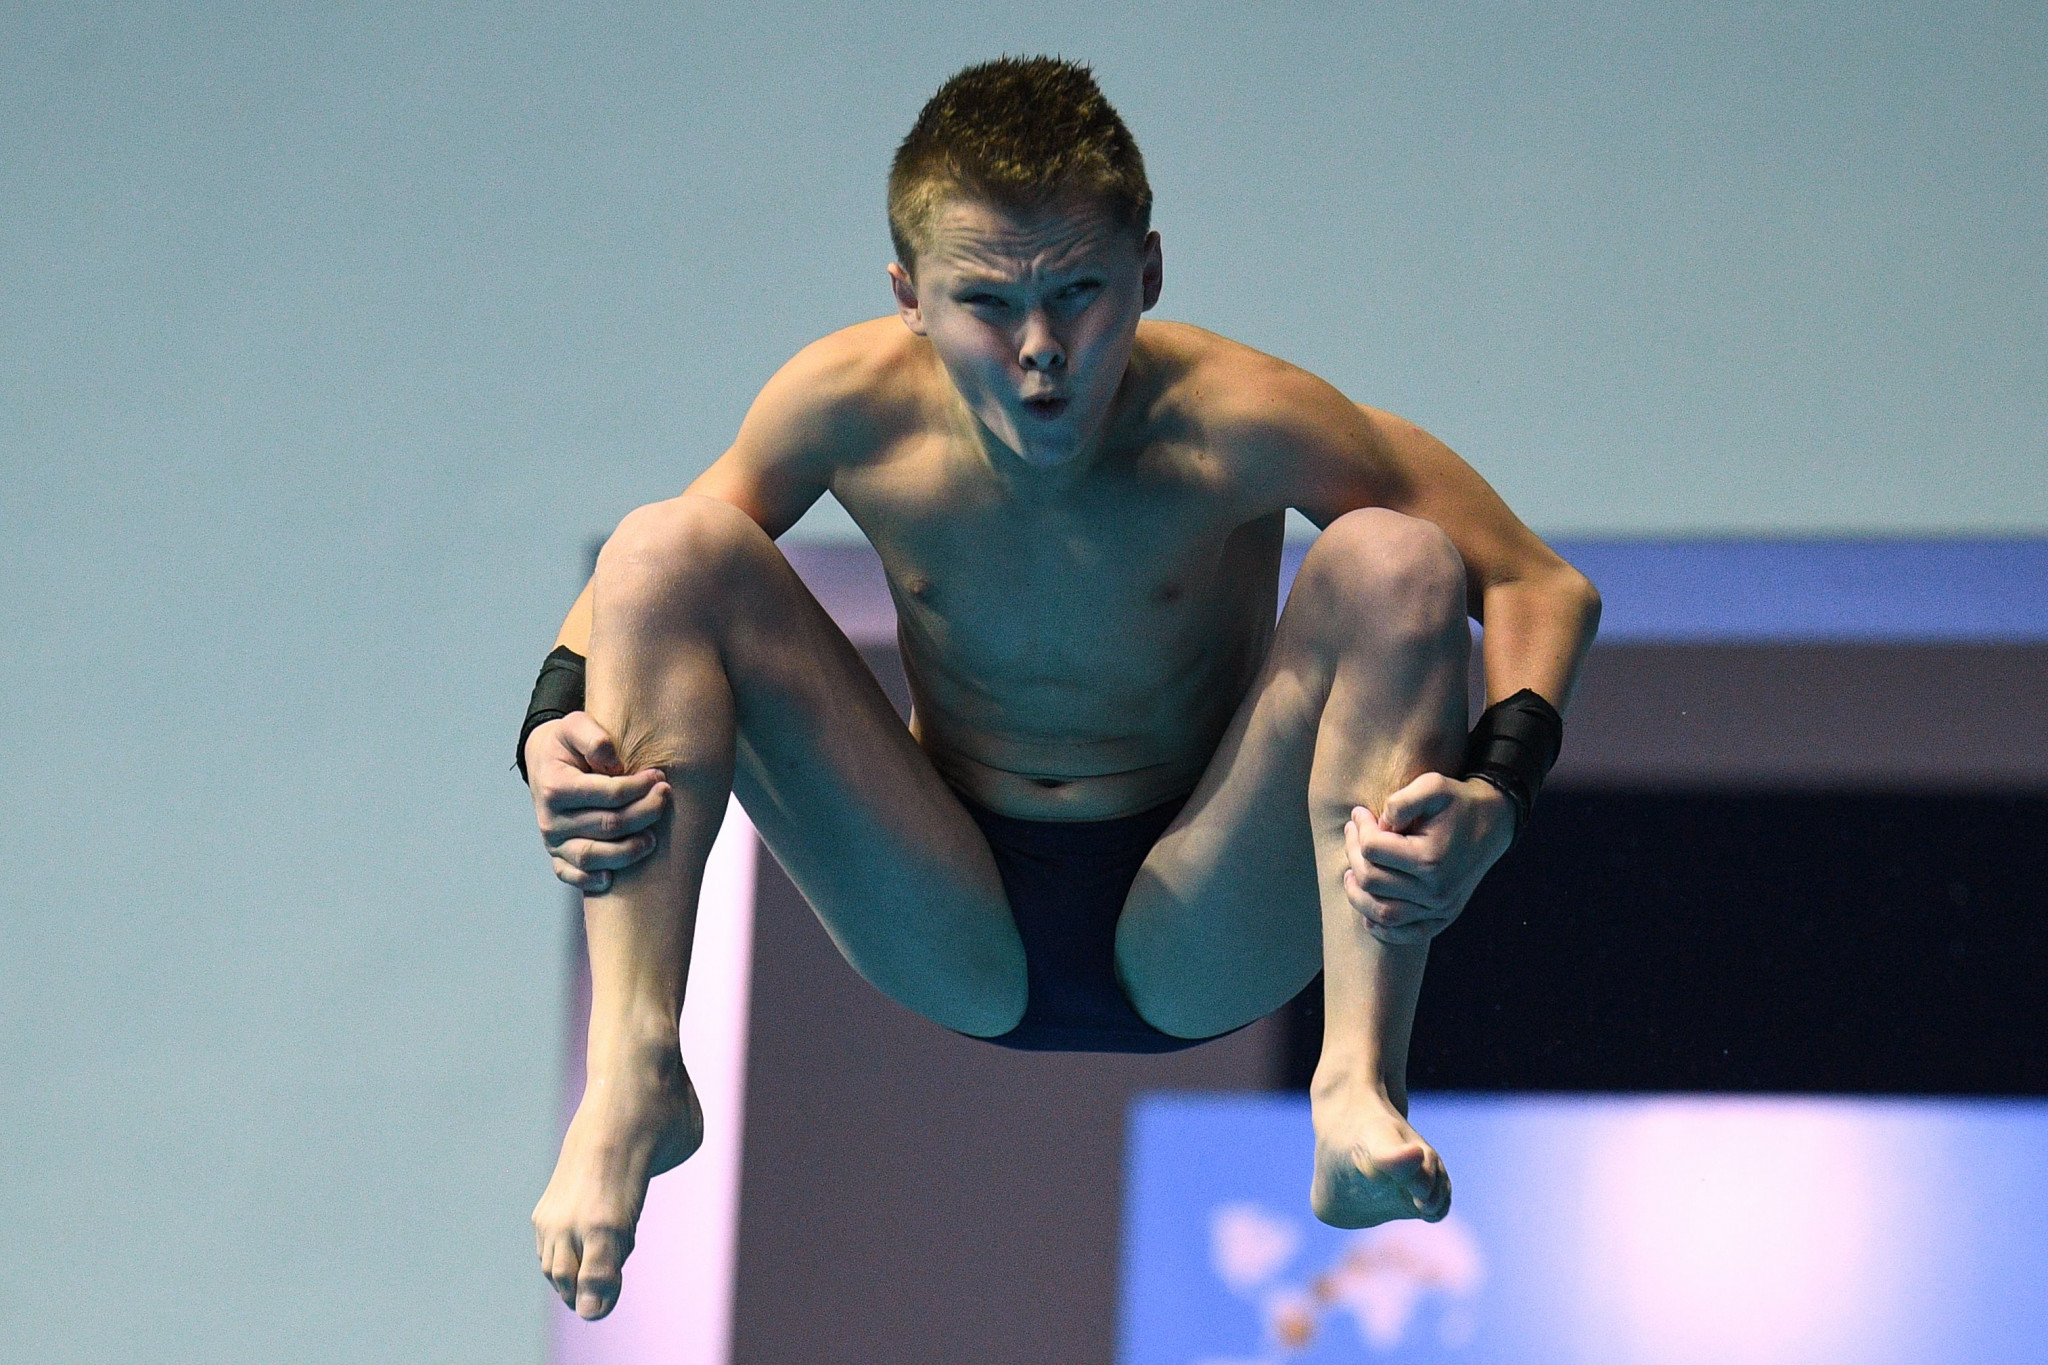 Thirteen-year-old Ukrainian wins gold at European Diving Championships and earns Olympic quota spot